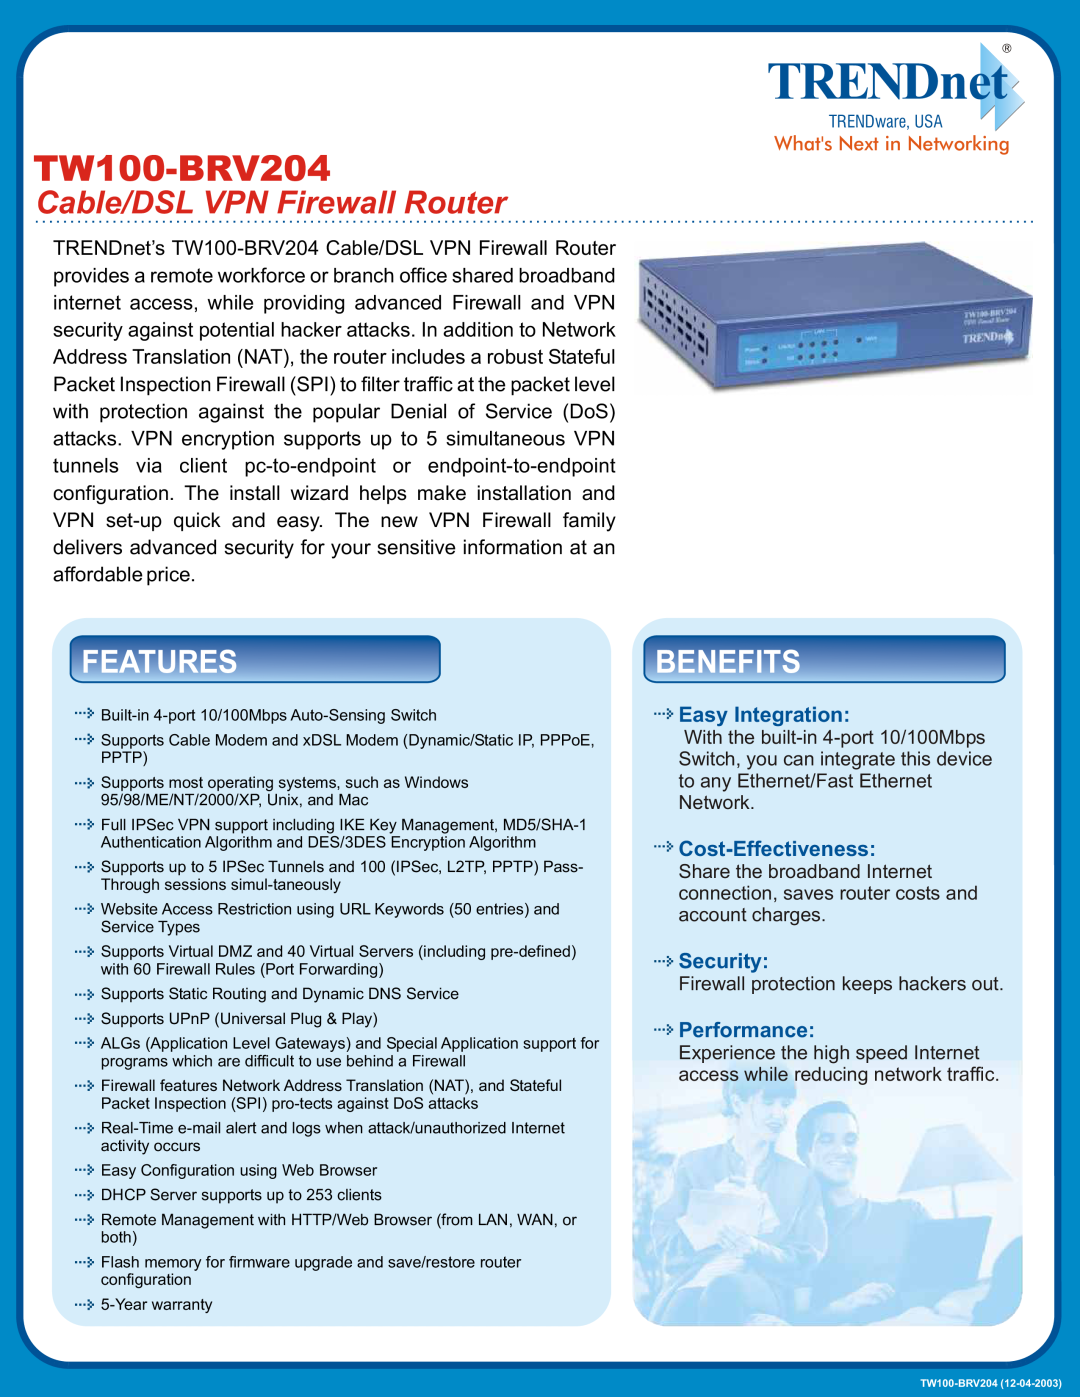 TRENDnet manual TW100-BRV204 VPN Firewall Router, Users Guide, Cable/DSL Internet Access 4-Port Switching Hub 